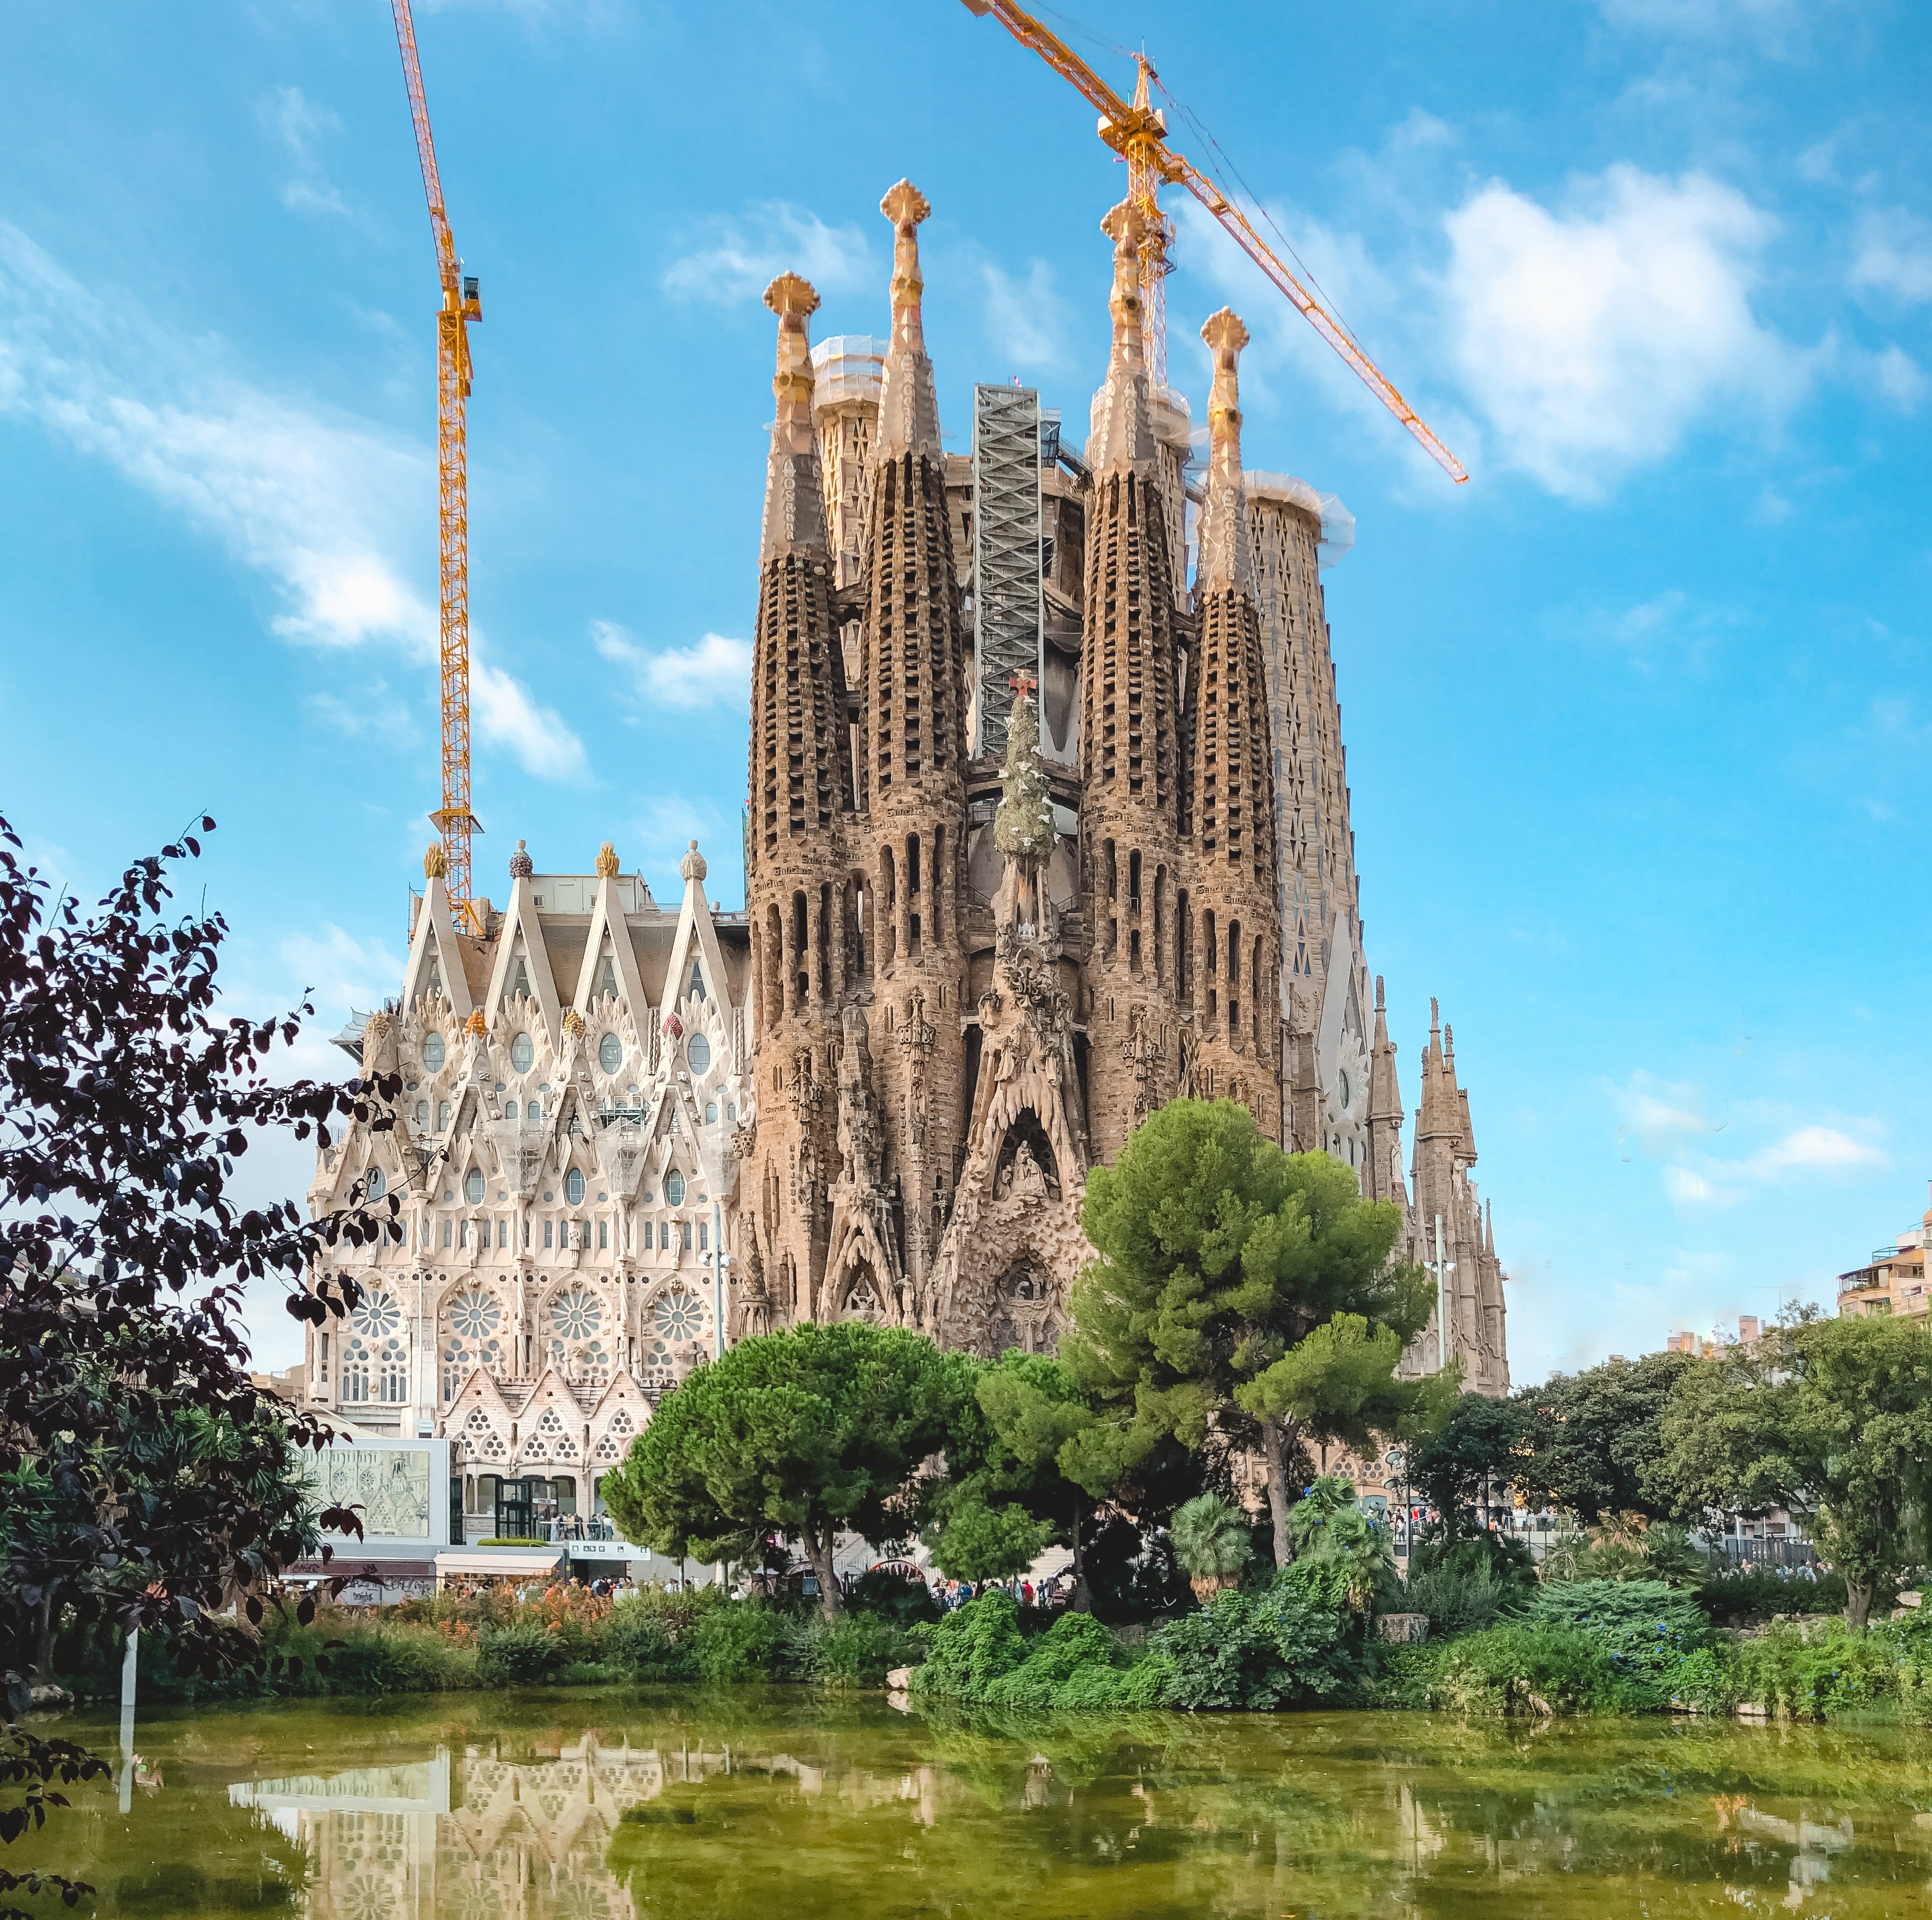 Sagrada Familia surrounded by trees and lake